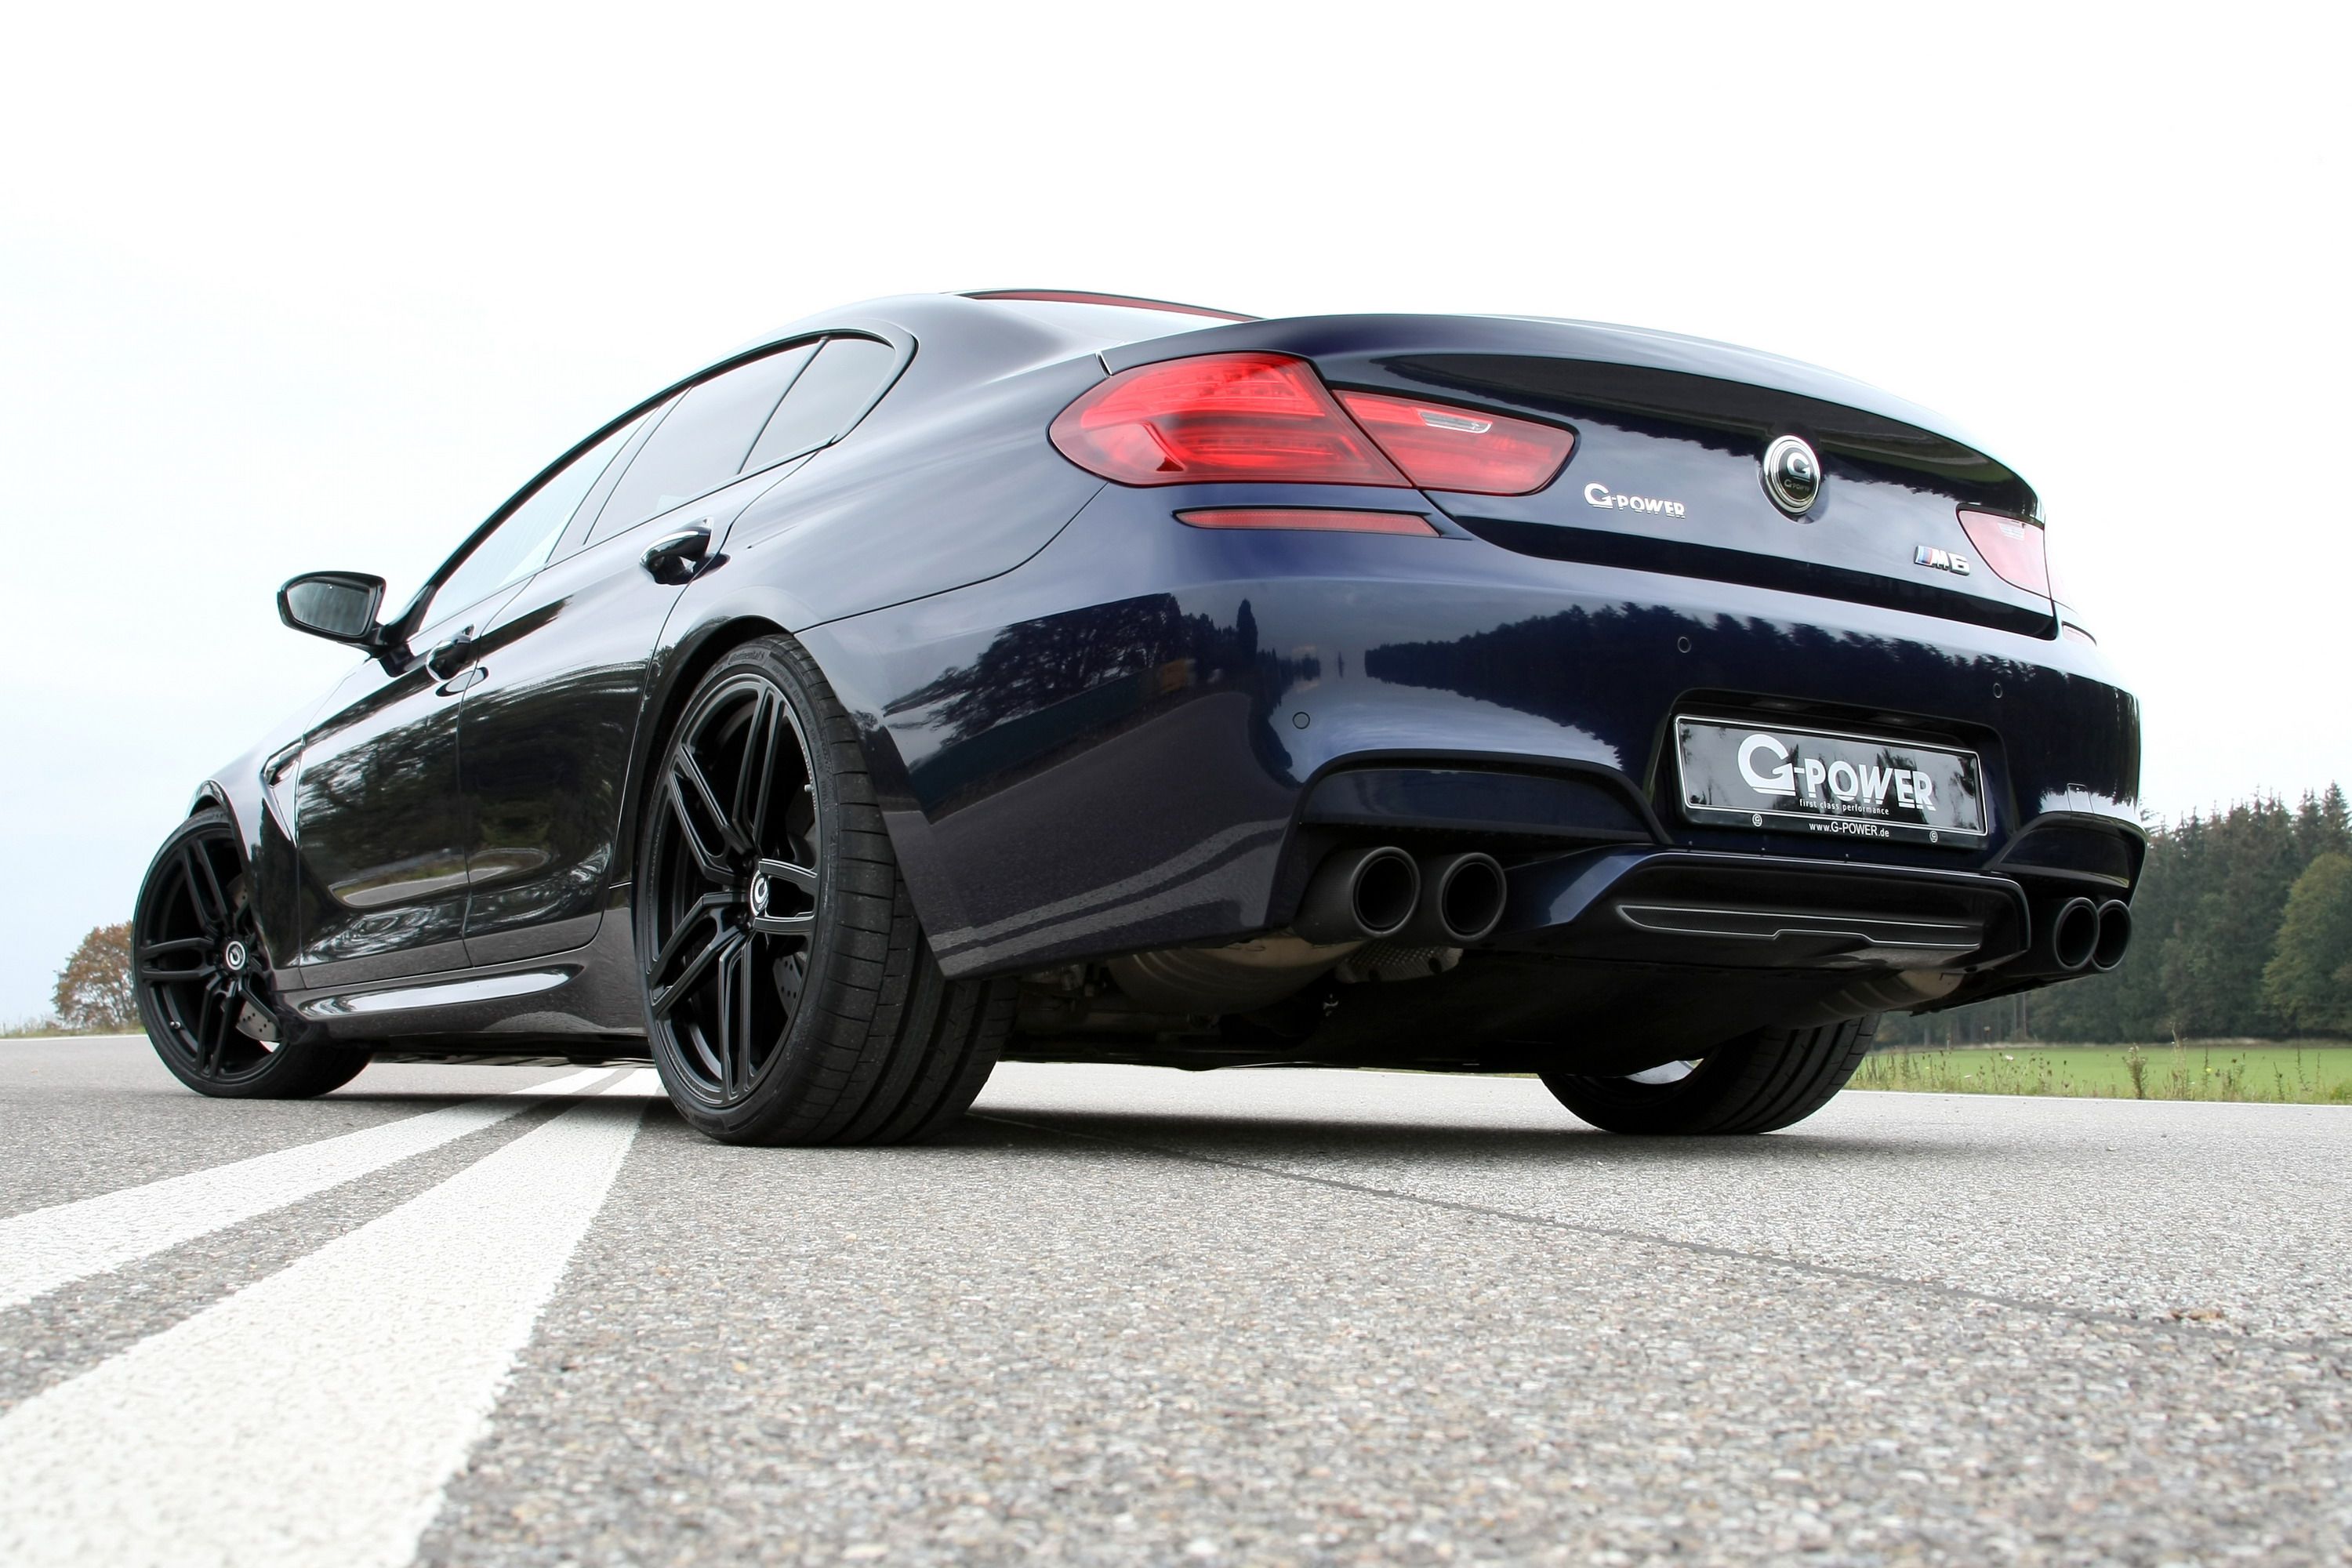 2016 BMW M6 Gran Coupe by G Power